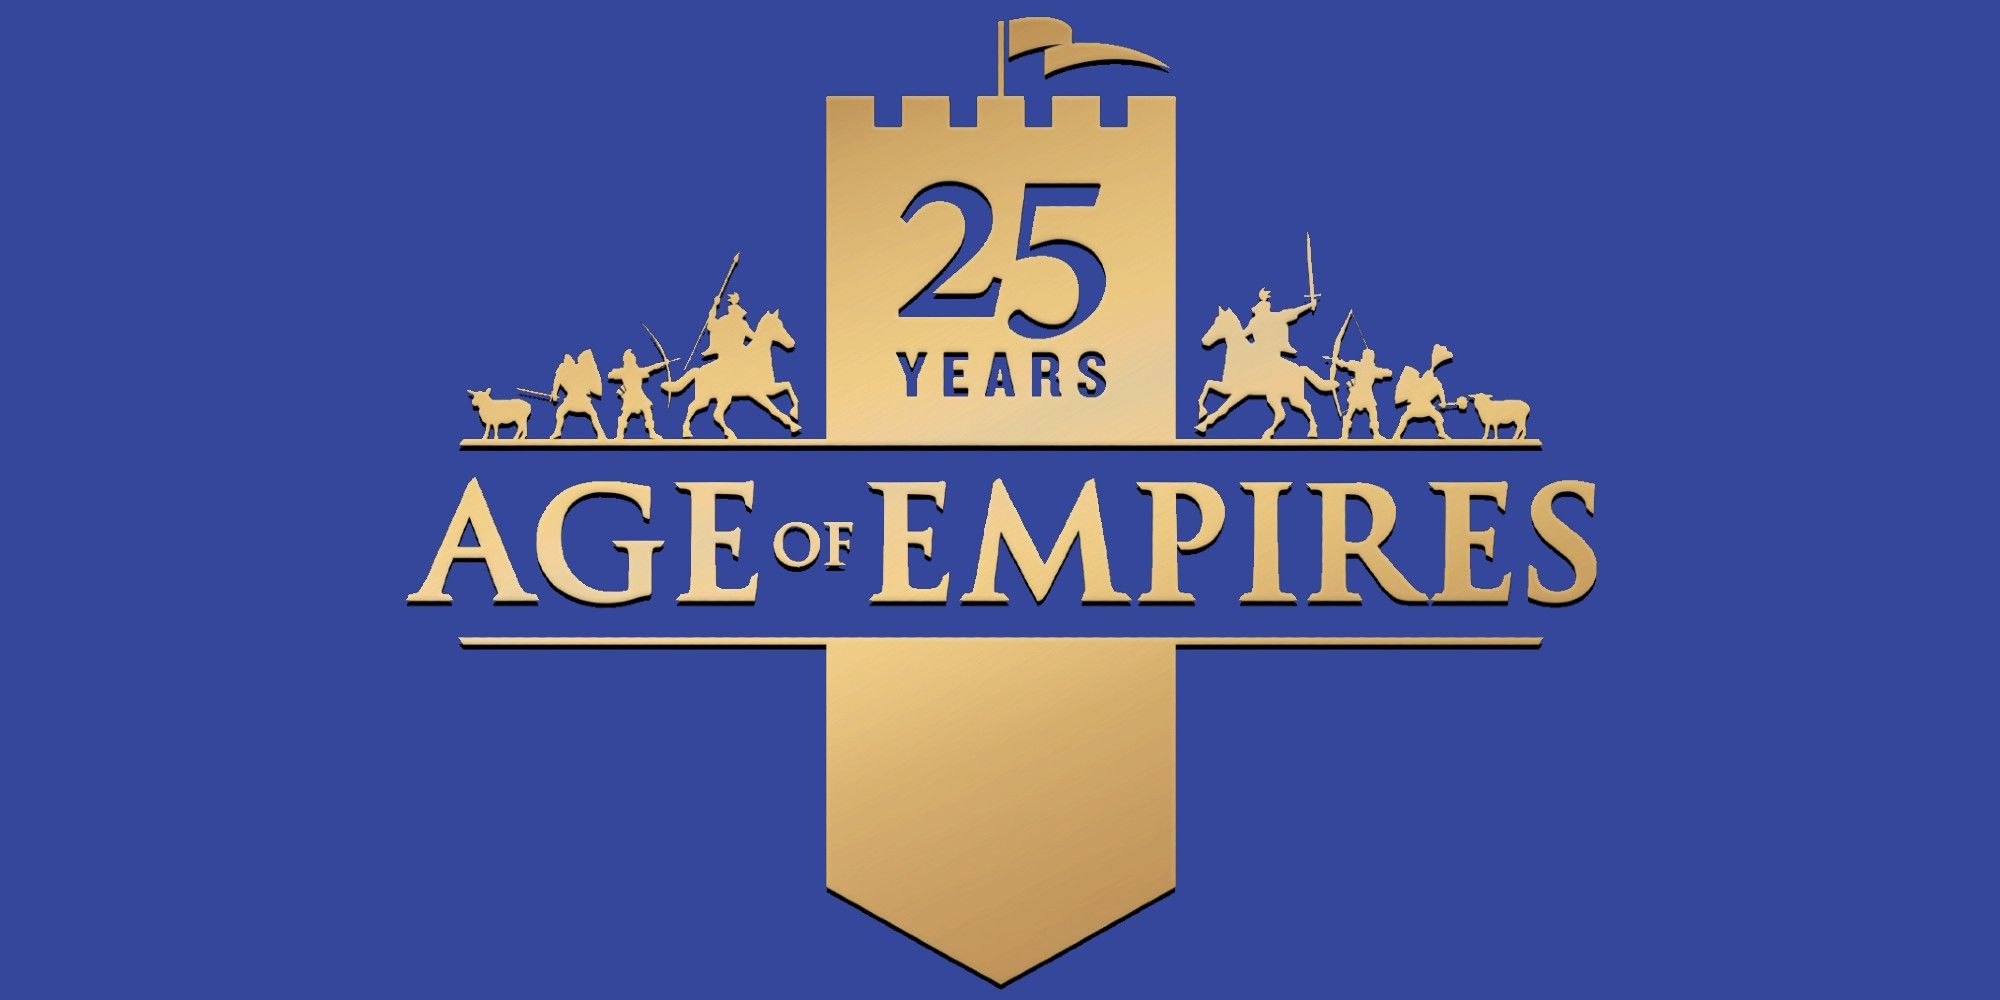 Text that says 25 Years Age of Empires with a blue backdrop.